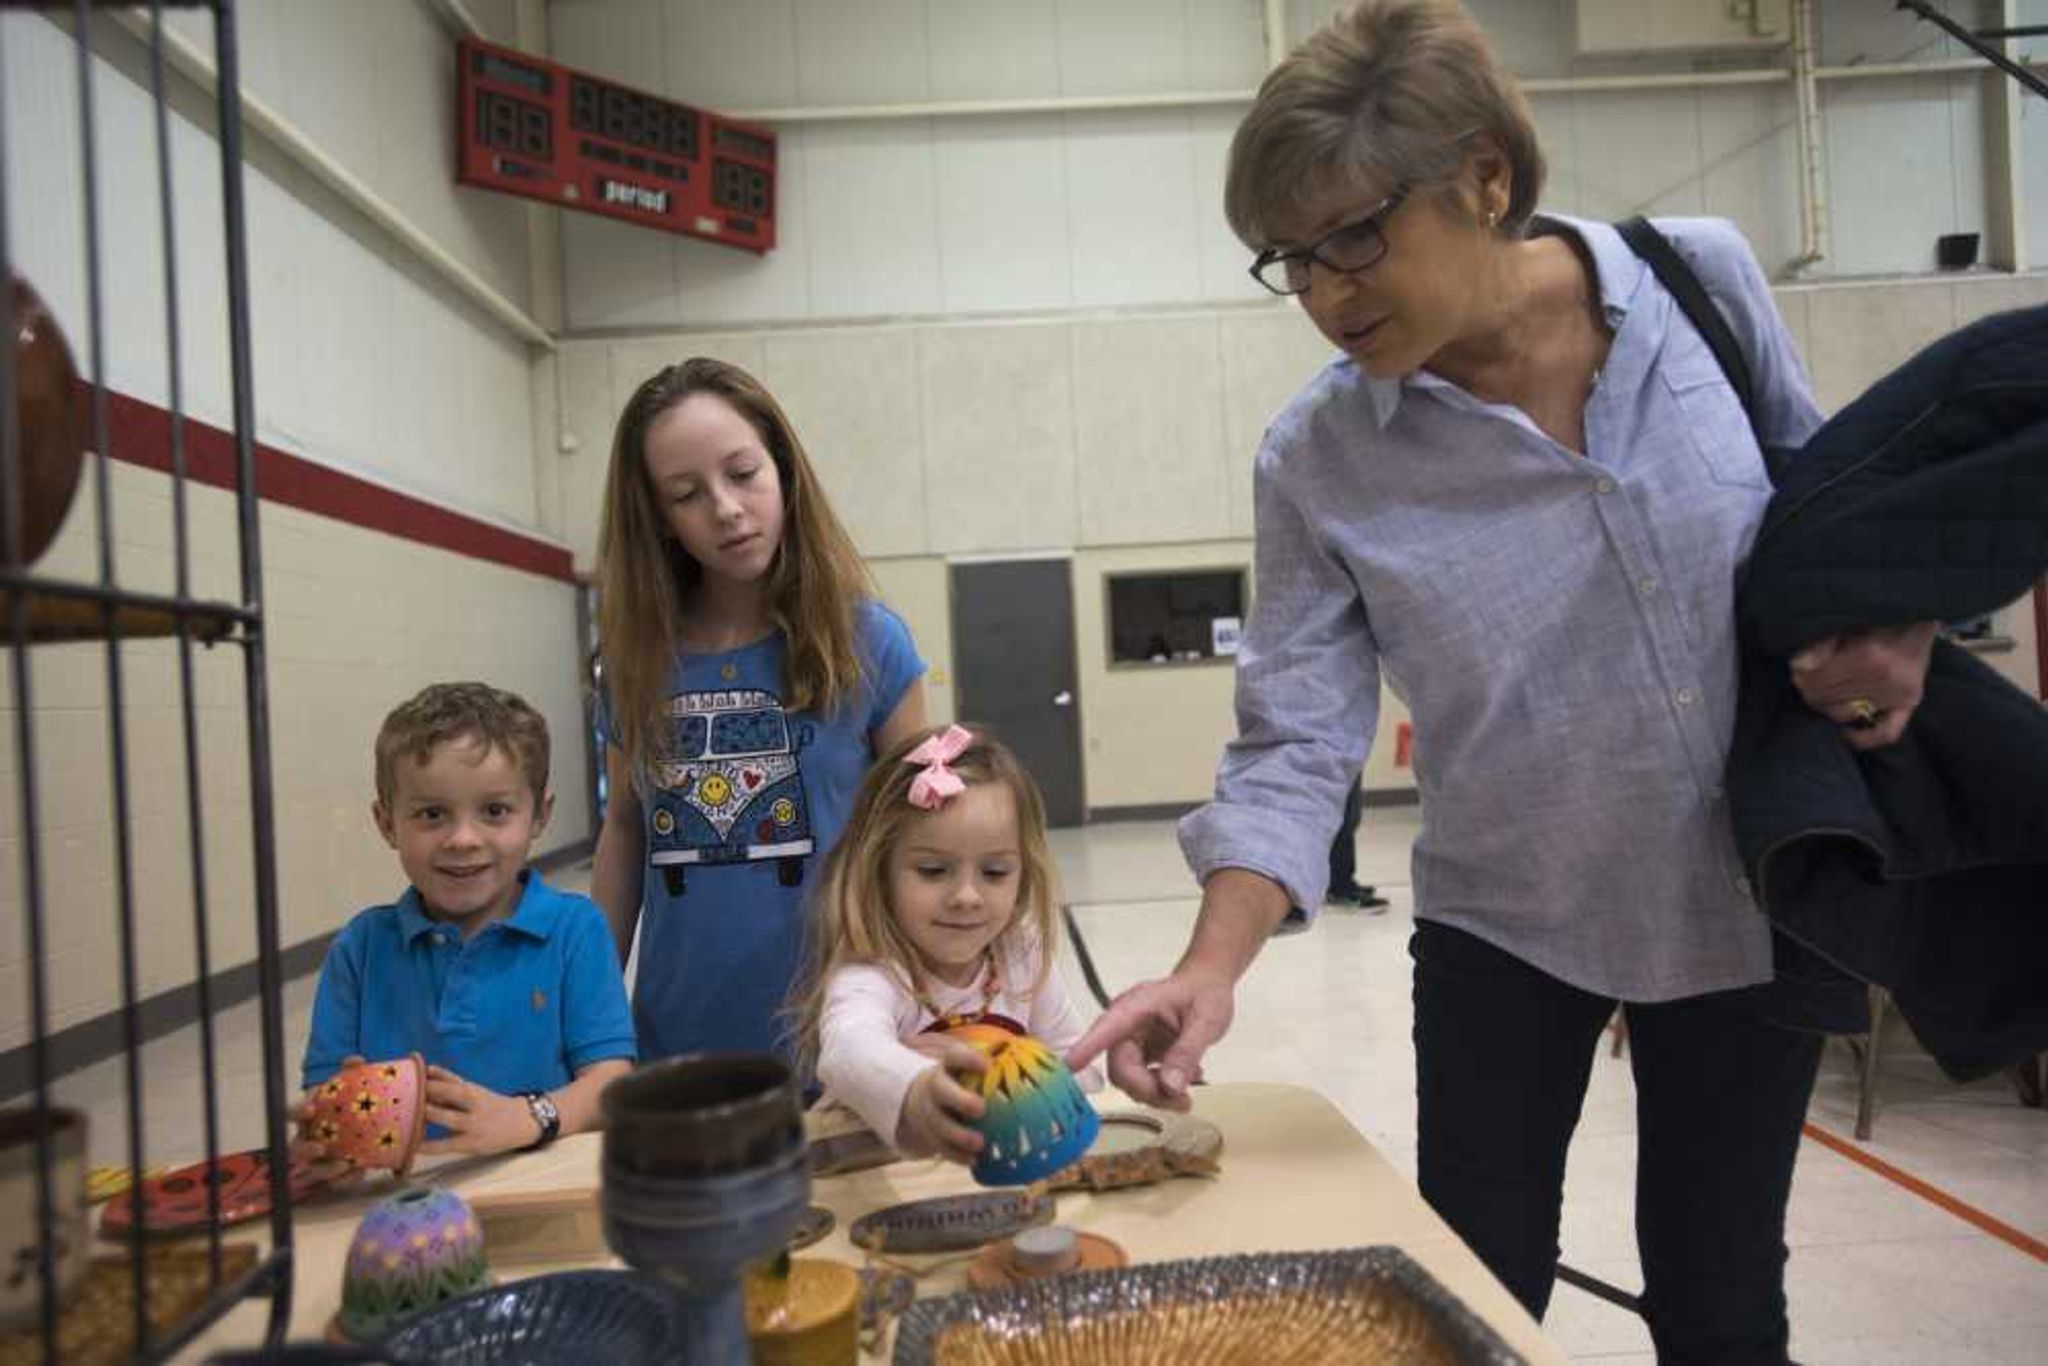 Barb Morgan looks at decorative bowls with the Brandhorst children, from left, Conrad, 6, Annabelle, 11, and Genevieve, 4, during the Empty Bowls Banquet on Sunday.